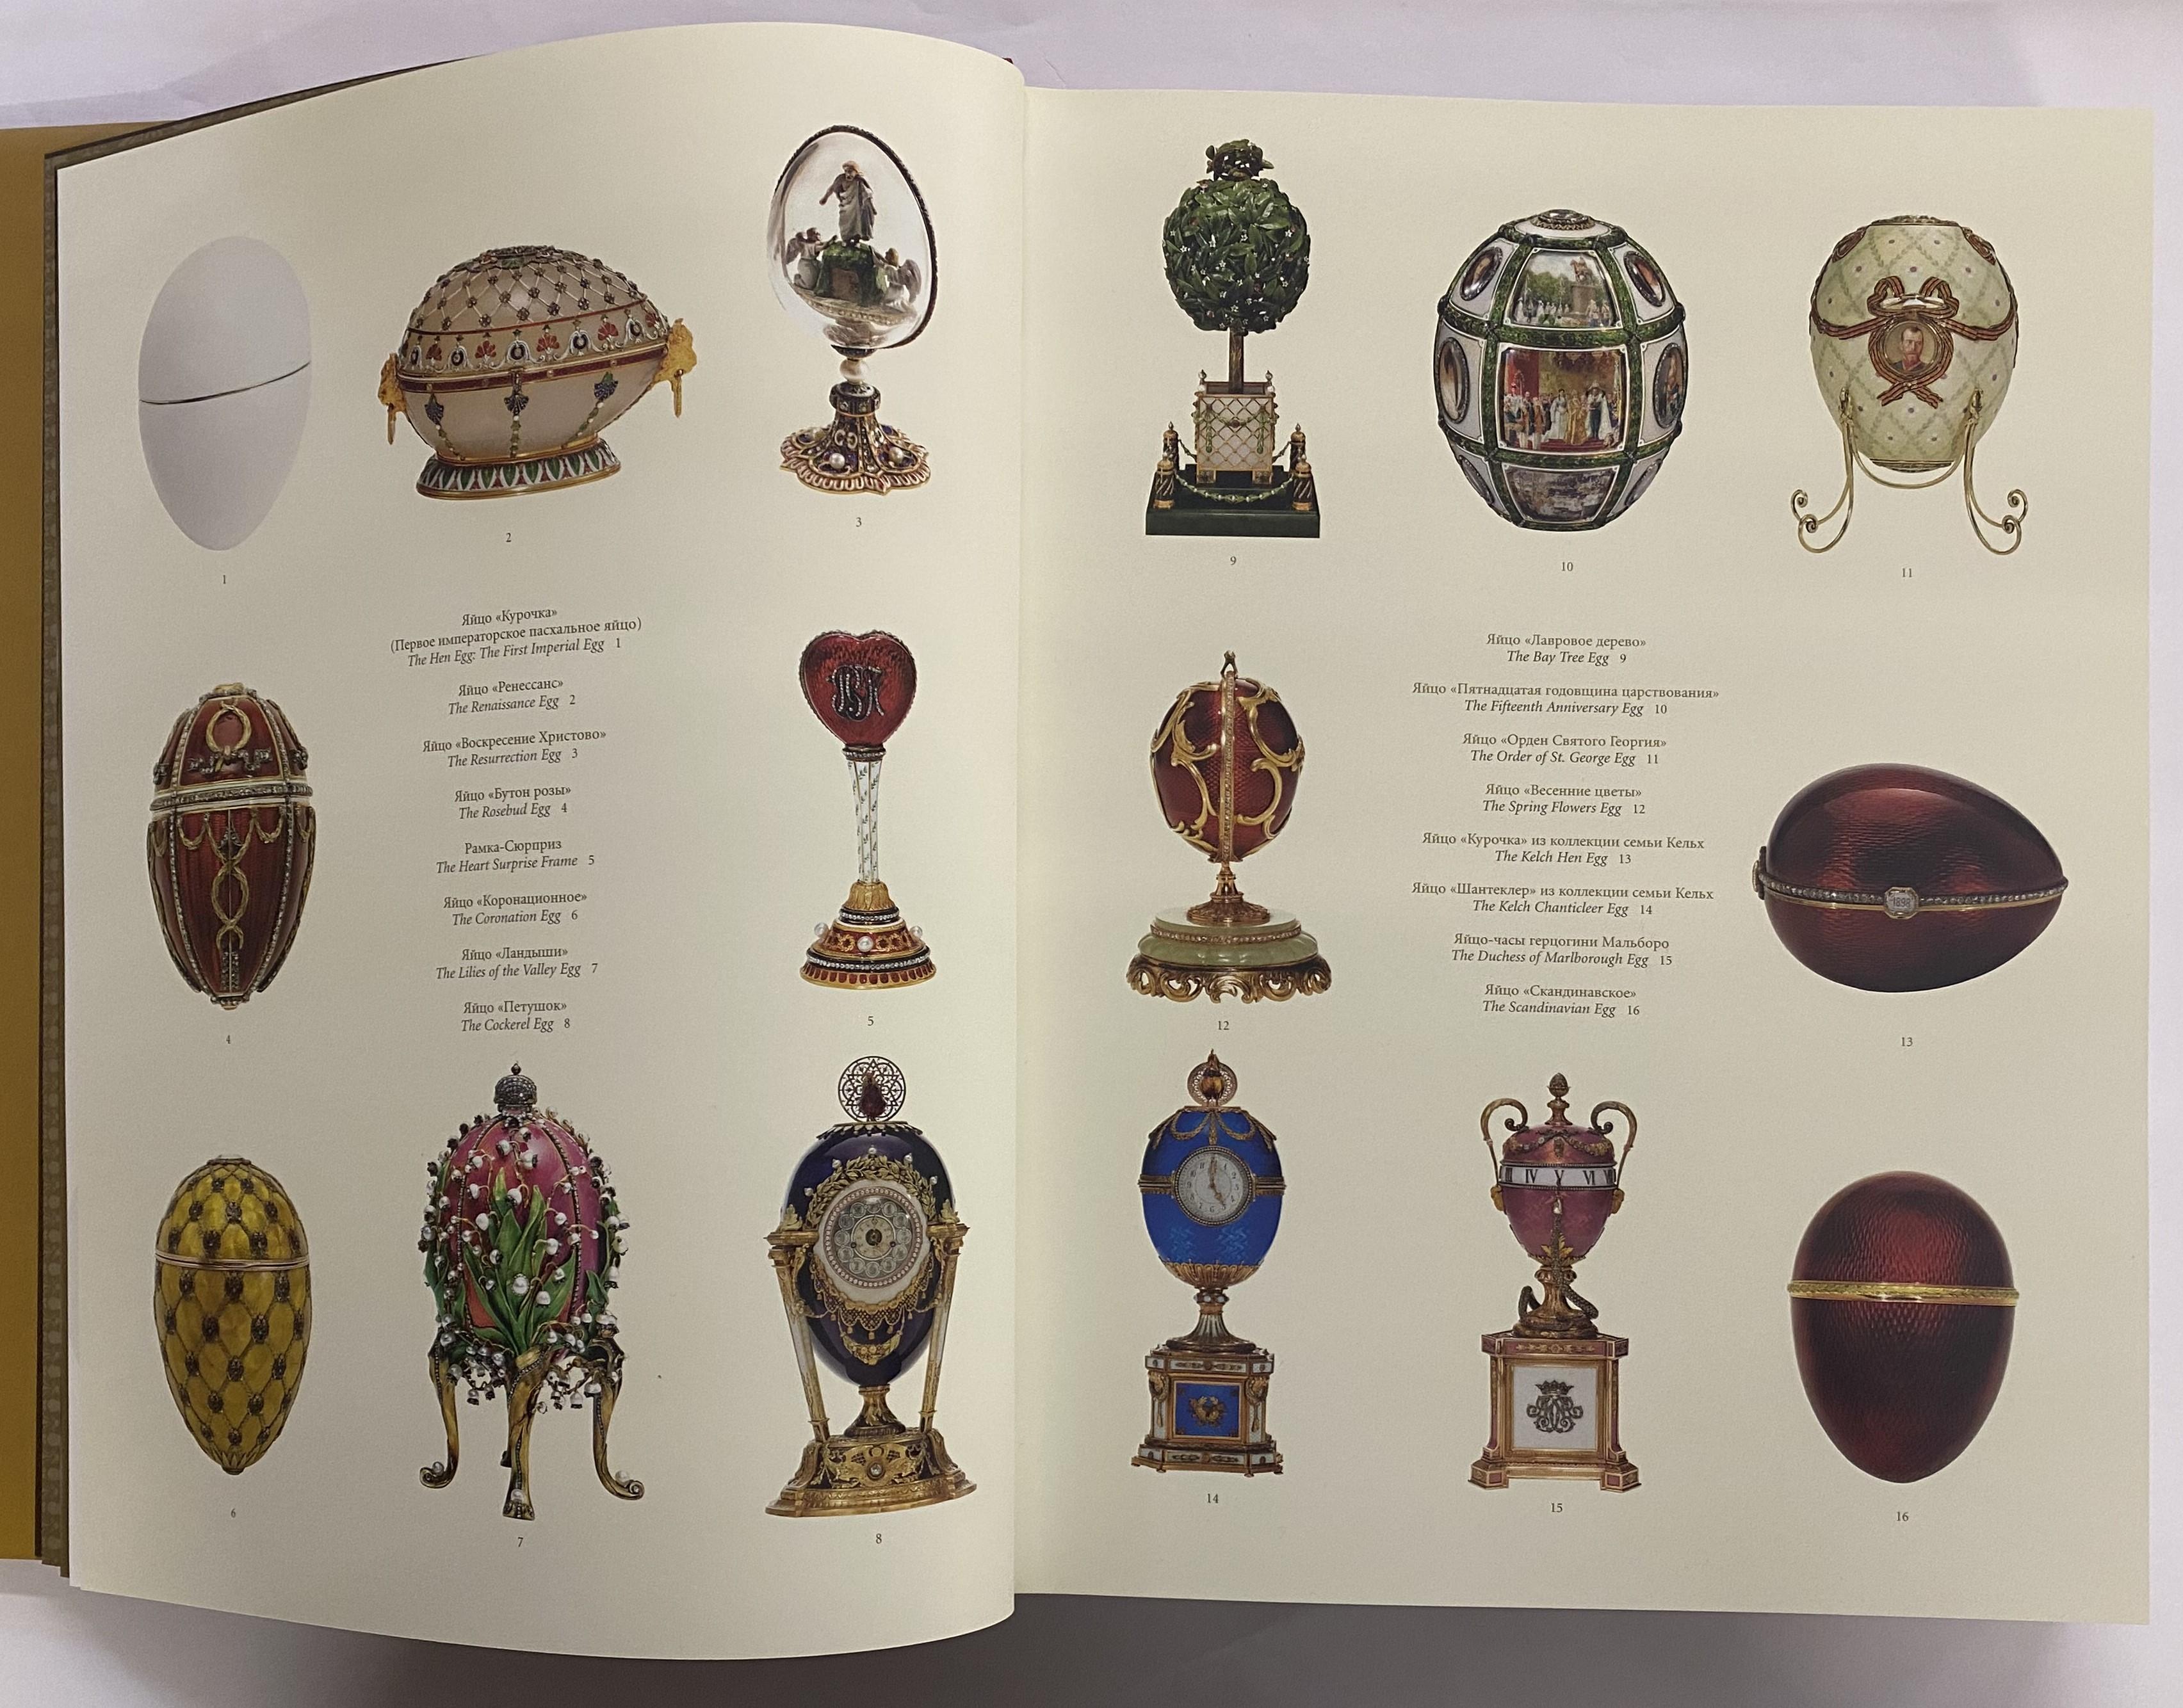 Collectible out-of-print edition! This magnificent publication presented in a slipcase is dedicated both to the life of jewellery genius Carl Faberge and the world-famous collection, including nine Imperial Easter eggs, of his work originally